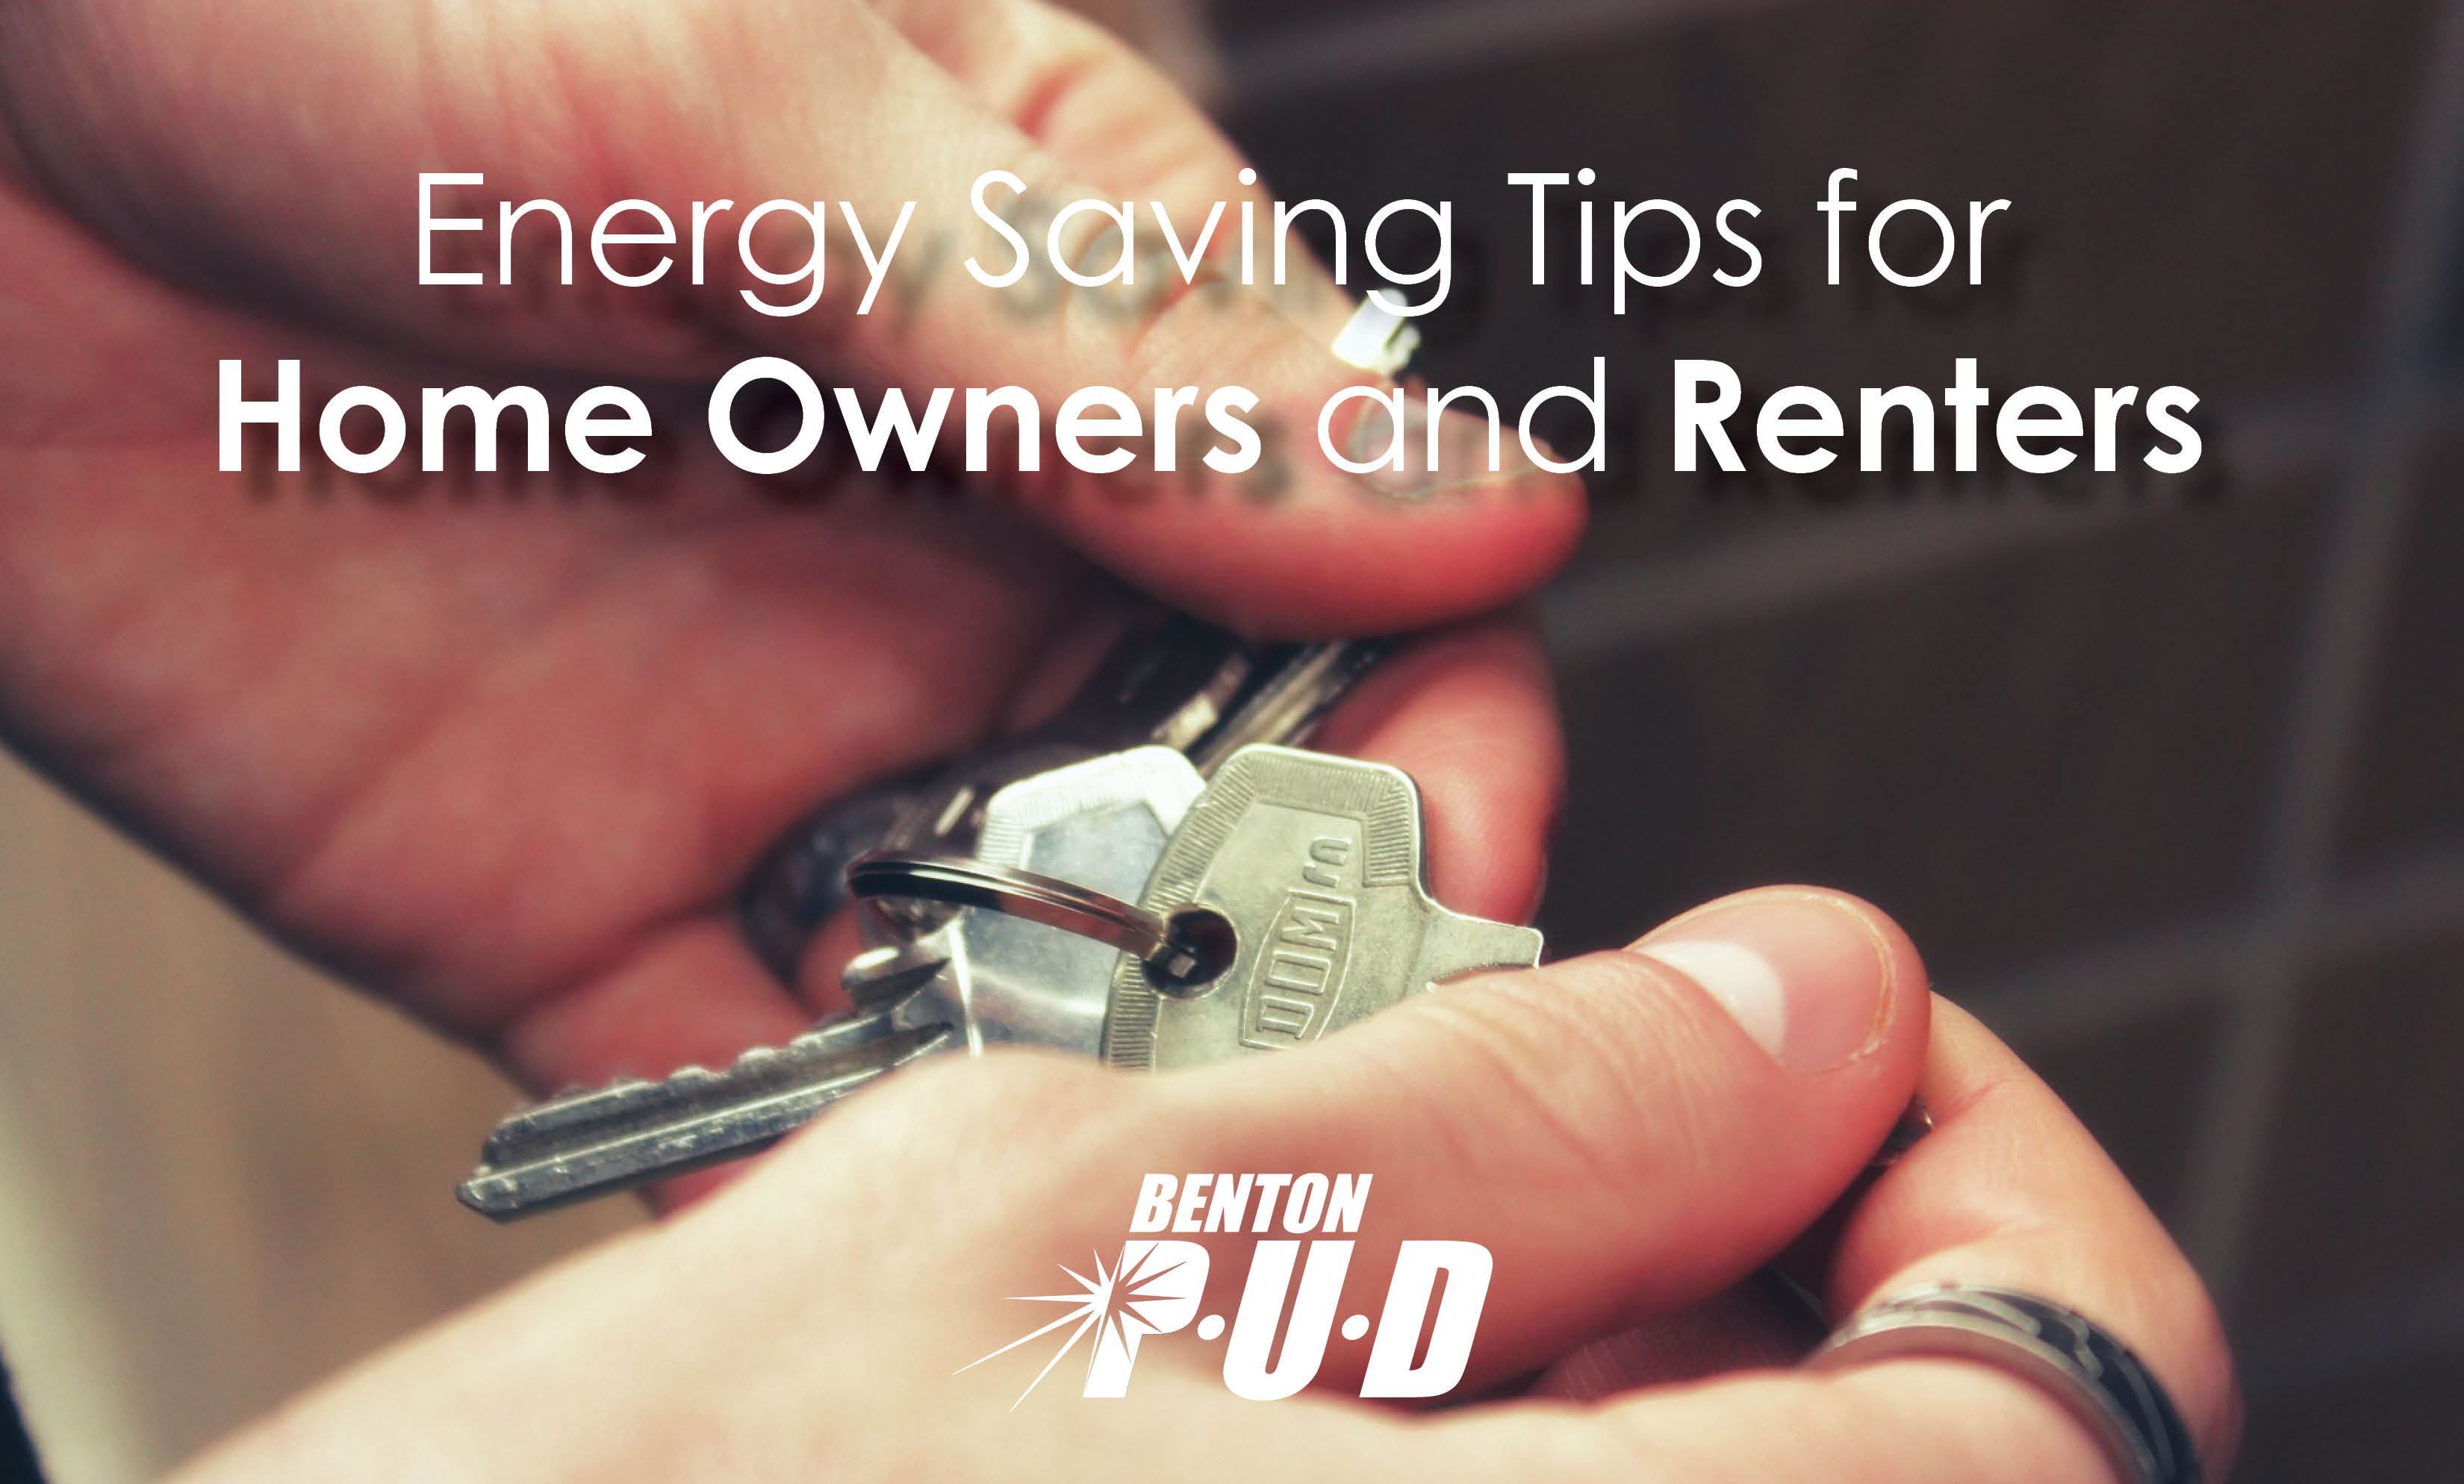 Energy Saving Tips For Home Owners & Renters